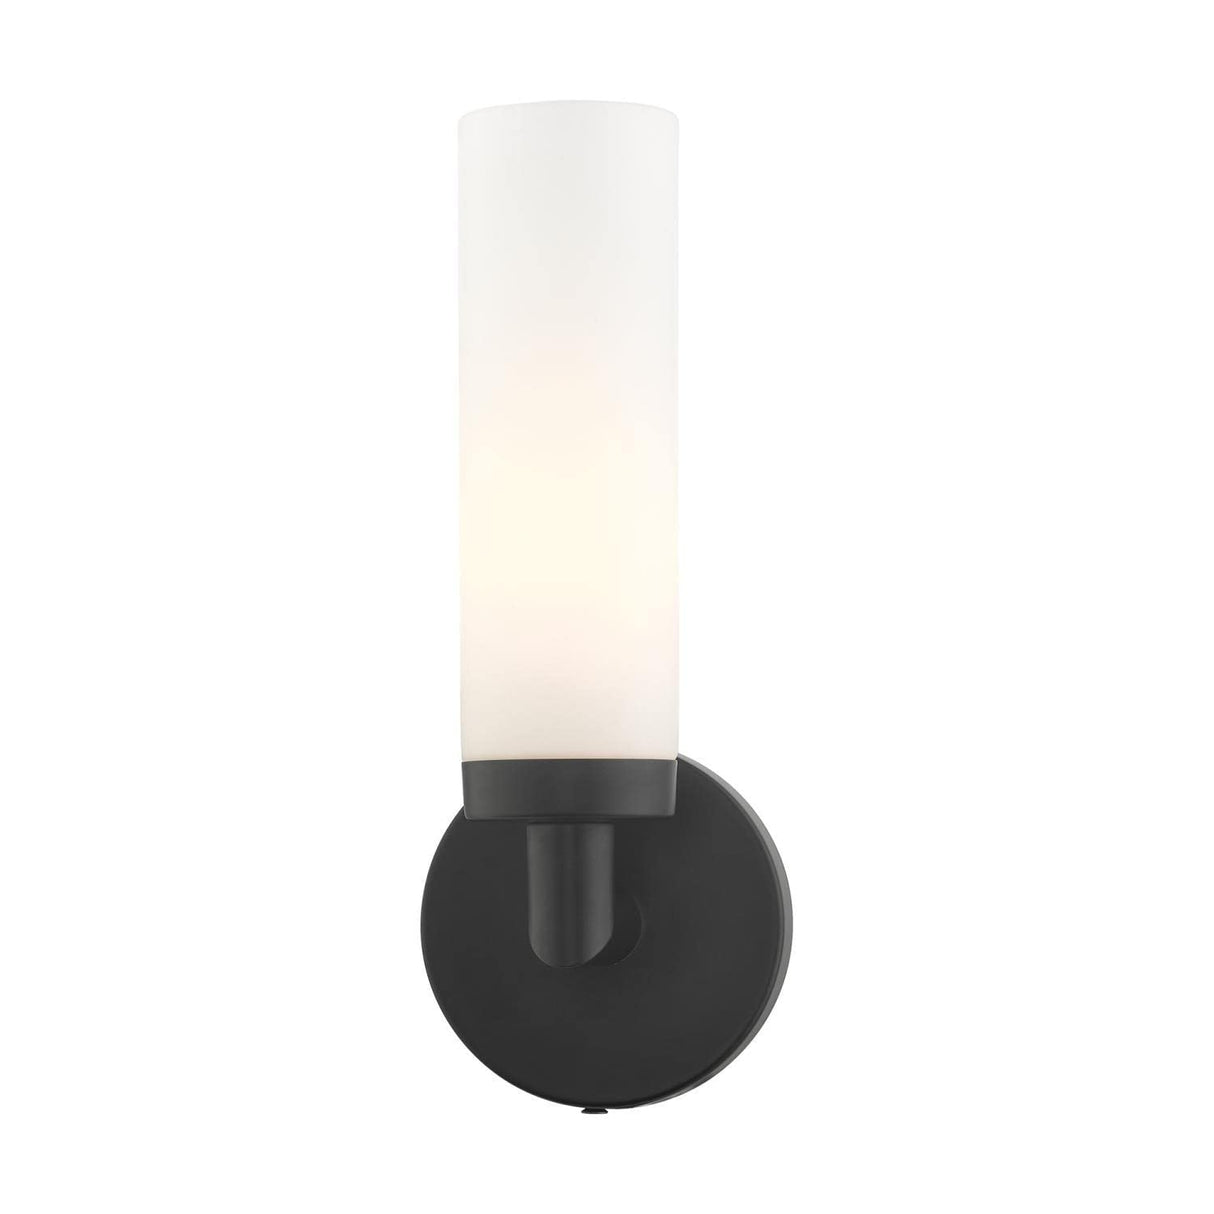 Livex Lighting 10103-04 Aero Collection ADA 1-Light Wall Sconce Light with Satin Opal White Glass Cylinder Shade, Black, 4.25 x 11